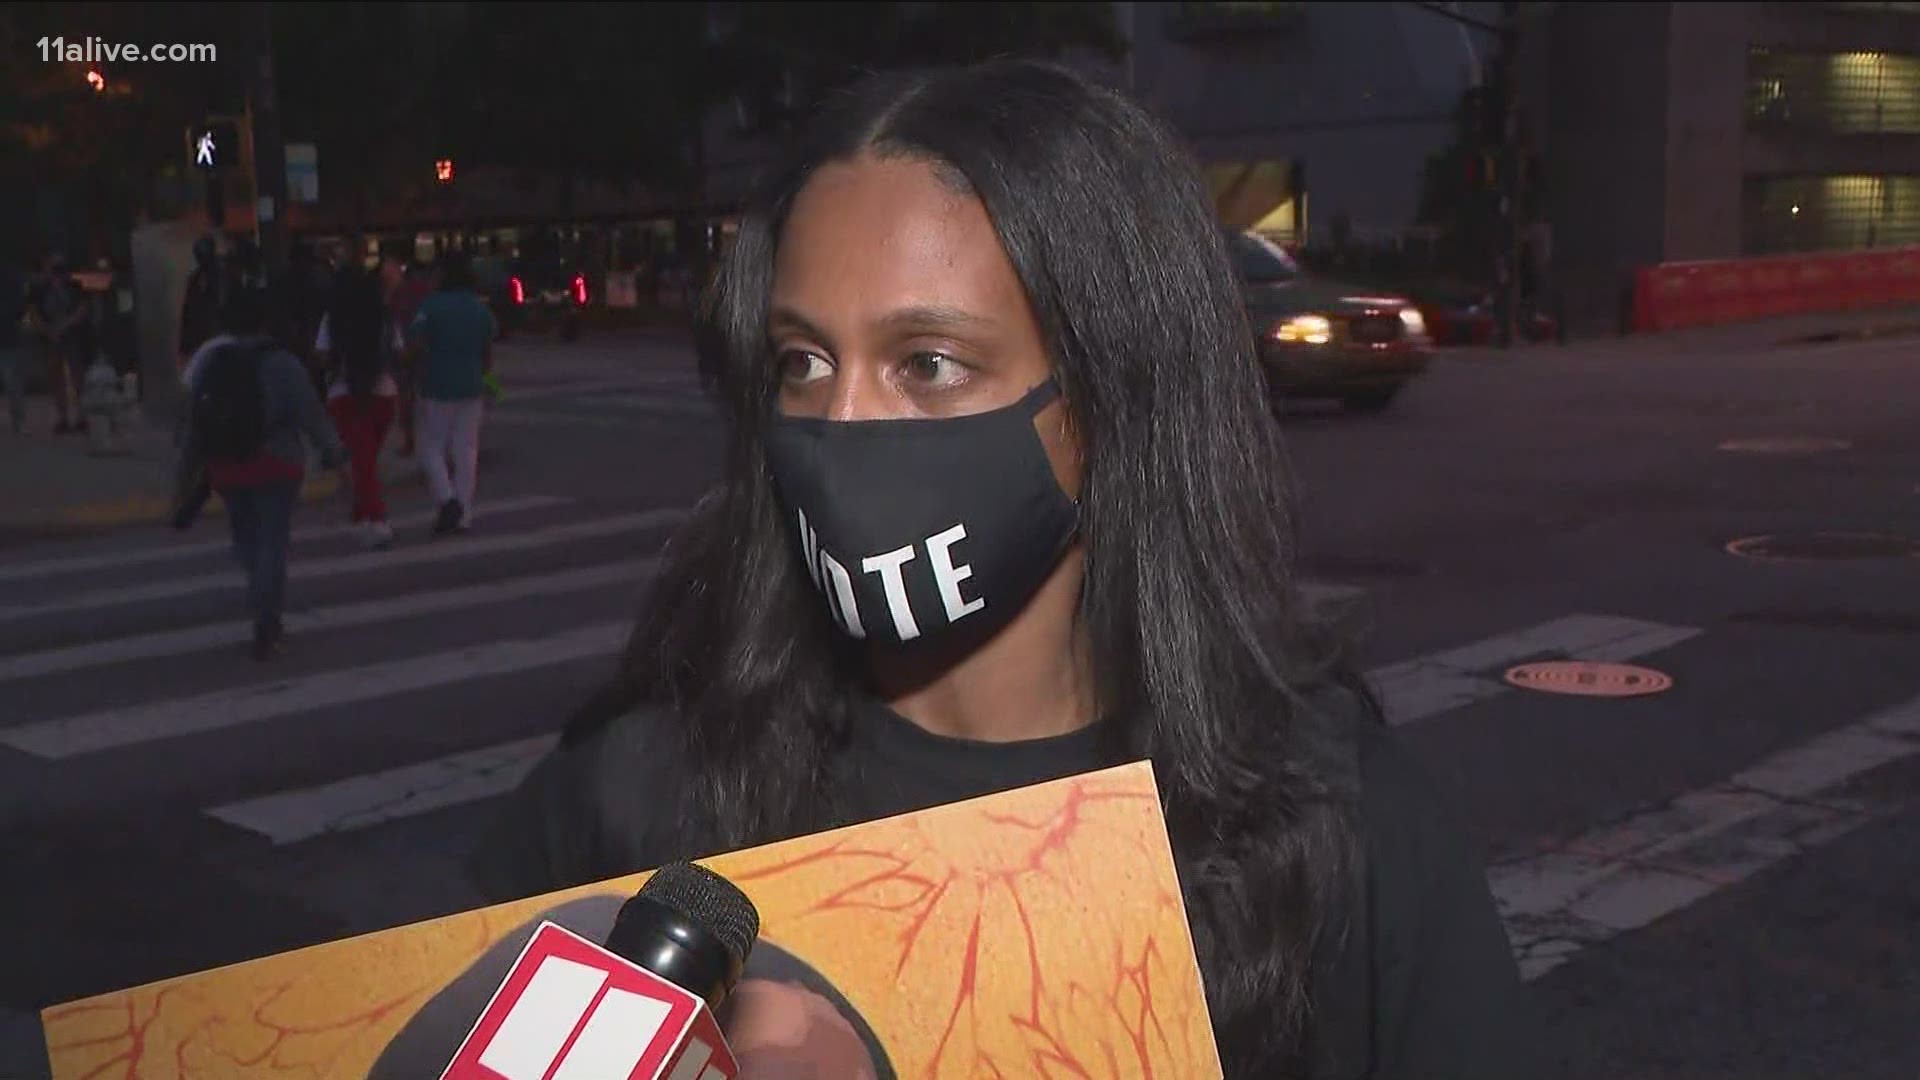 11Alive spoke to activists and others who attended a march following Derek Chauvin's guilty verdict